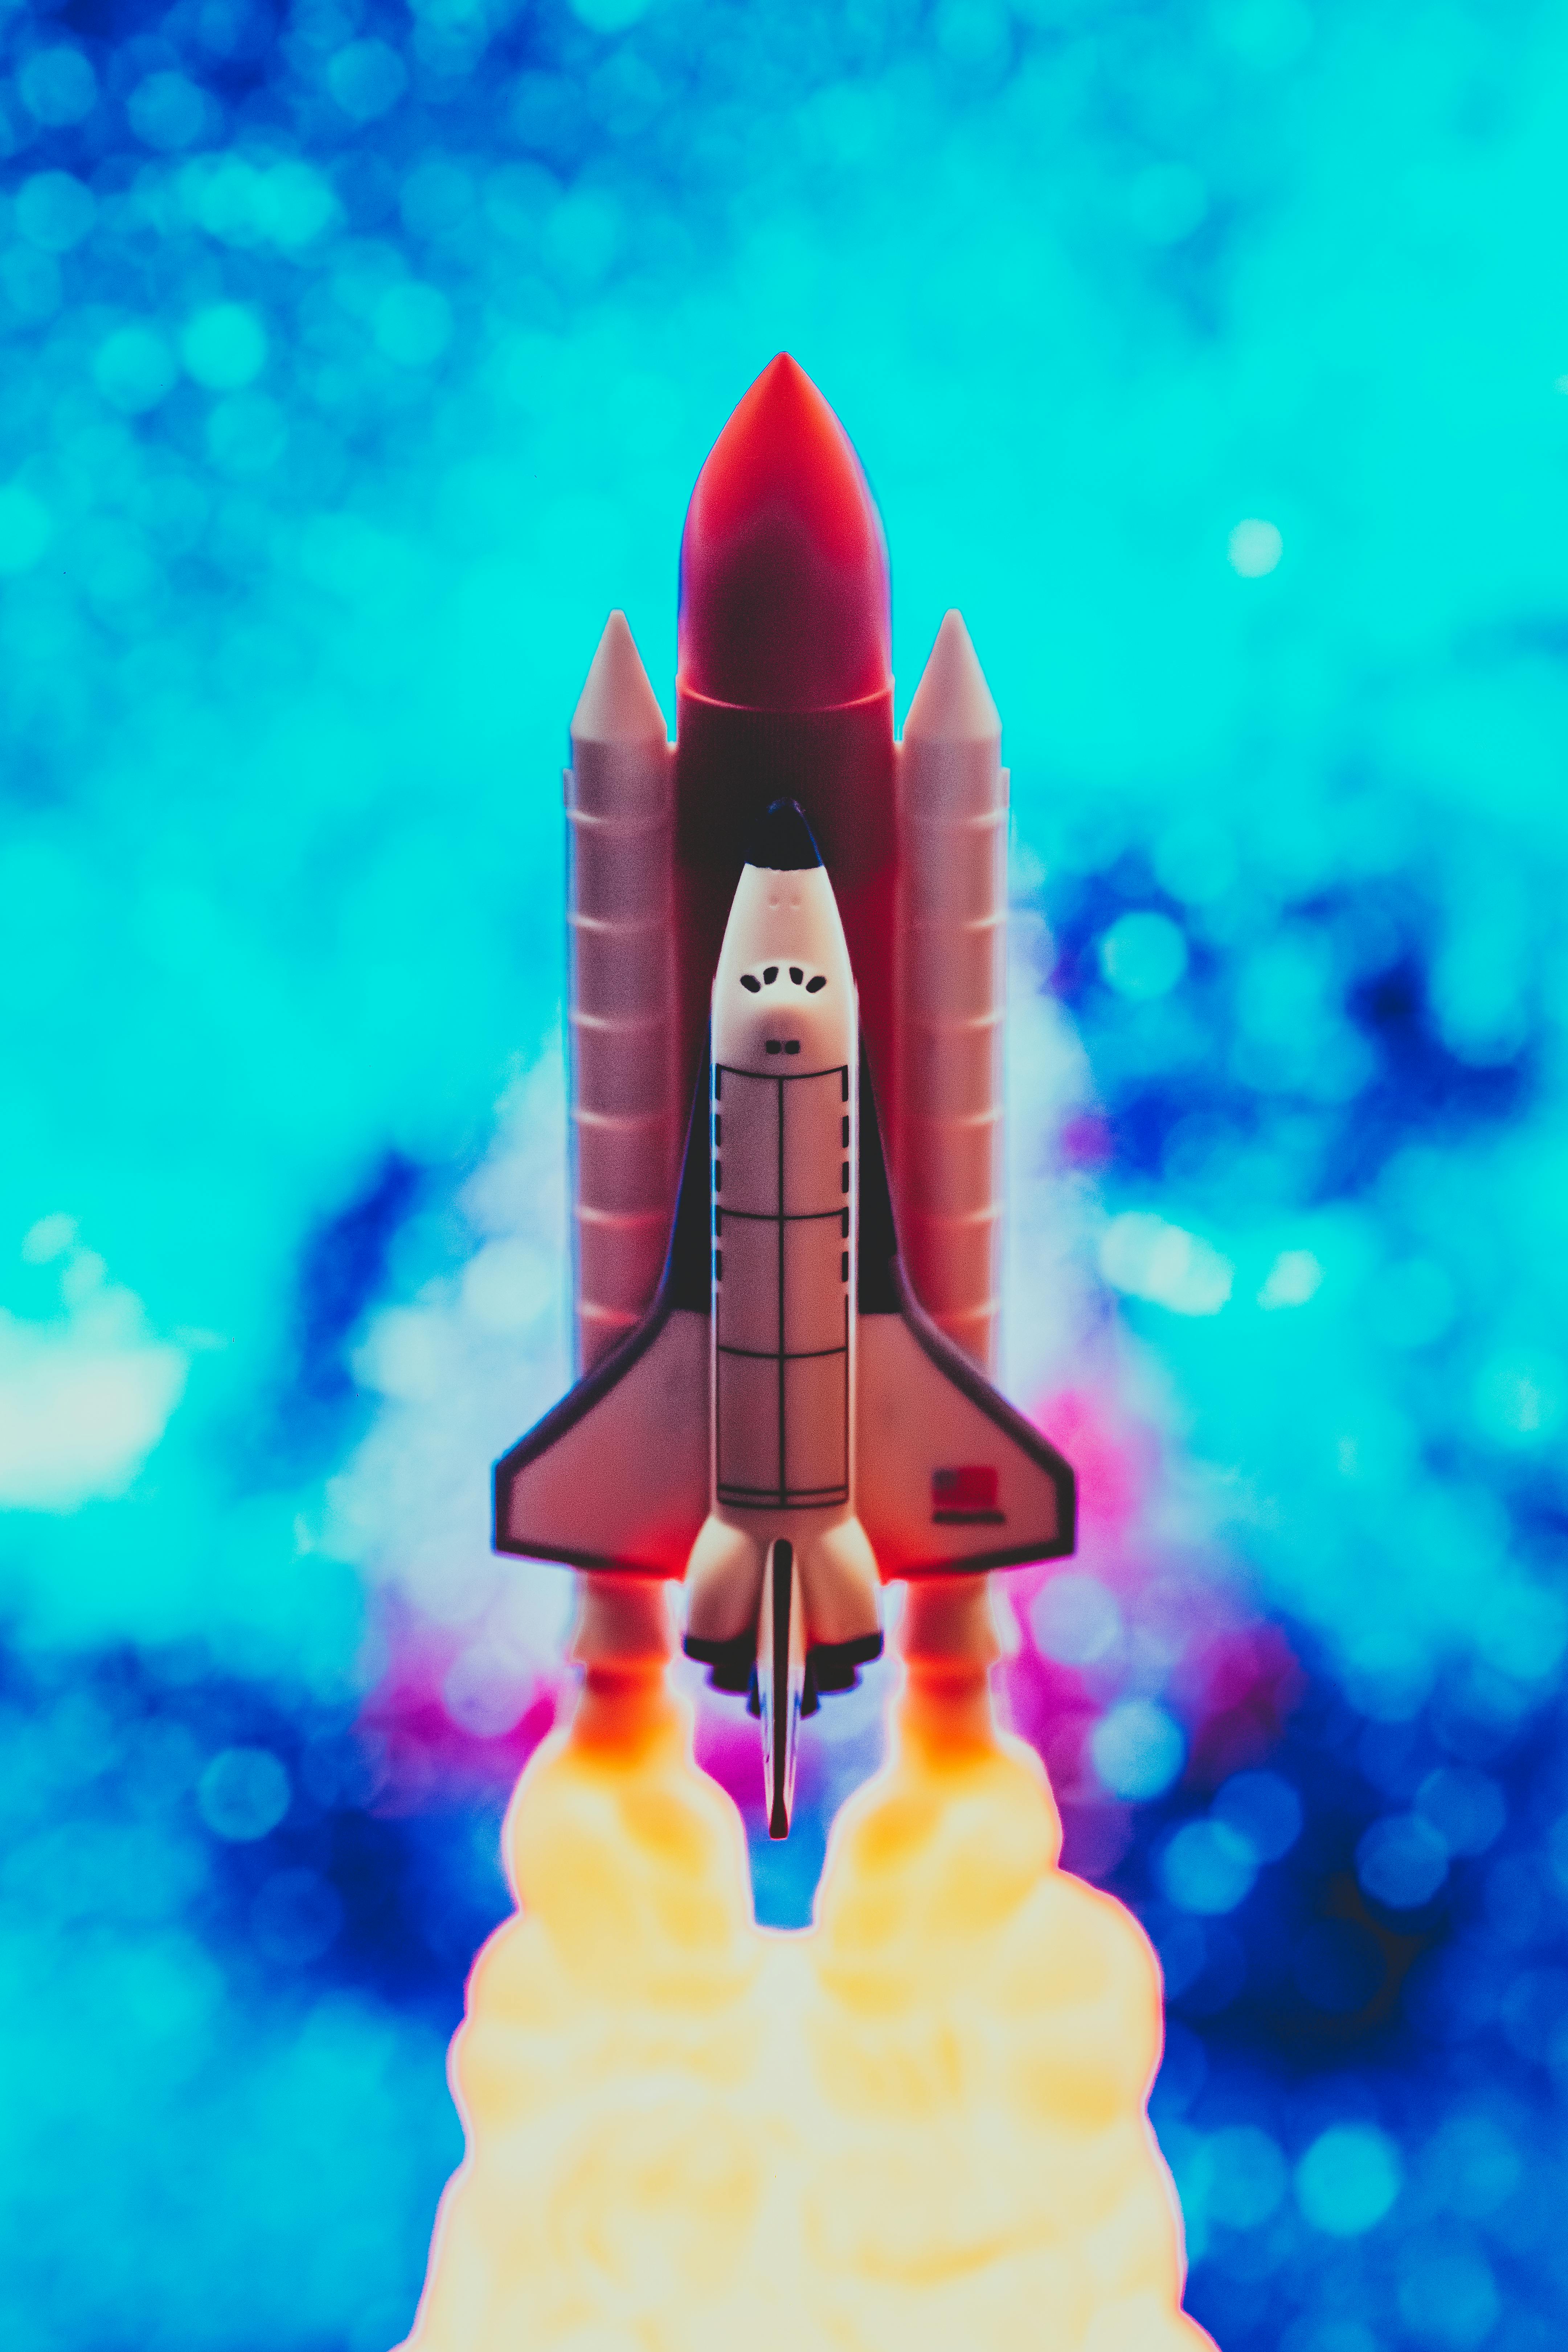 Rocket Photos, Download The BEST Free Rocket Stock Photos & HD Images